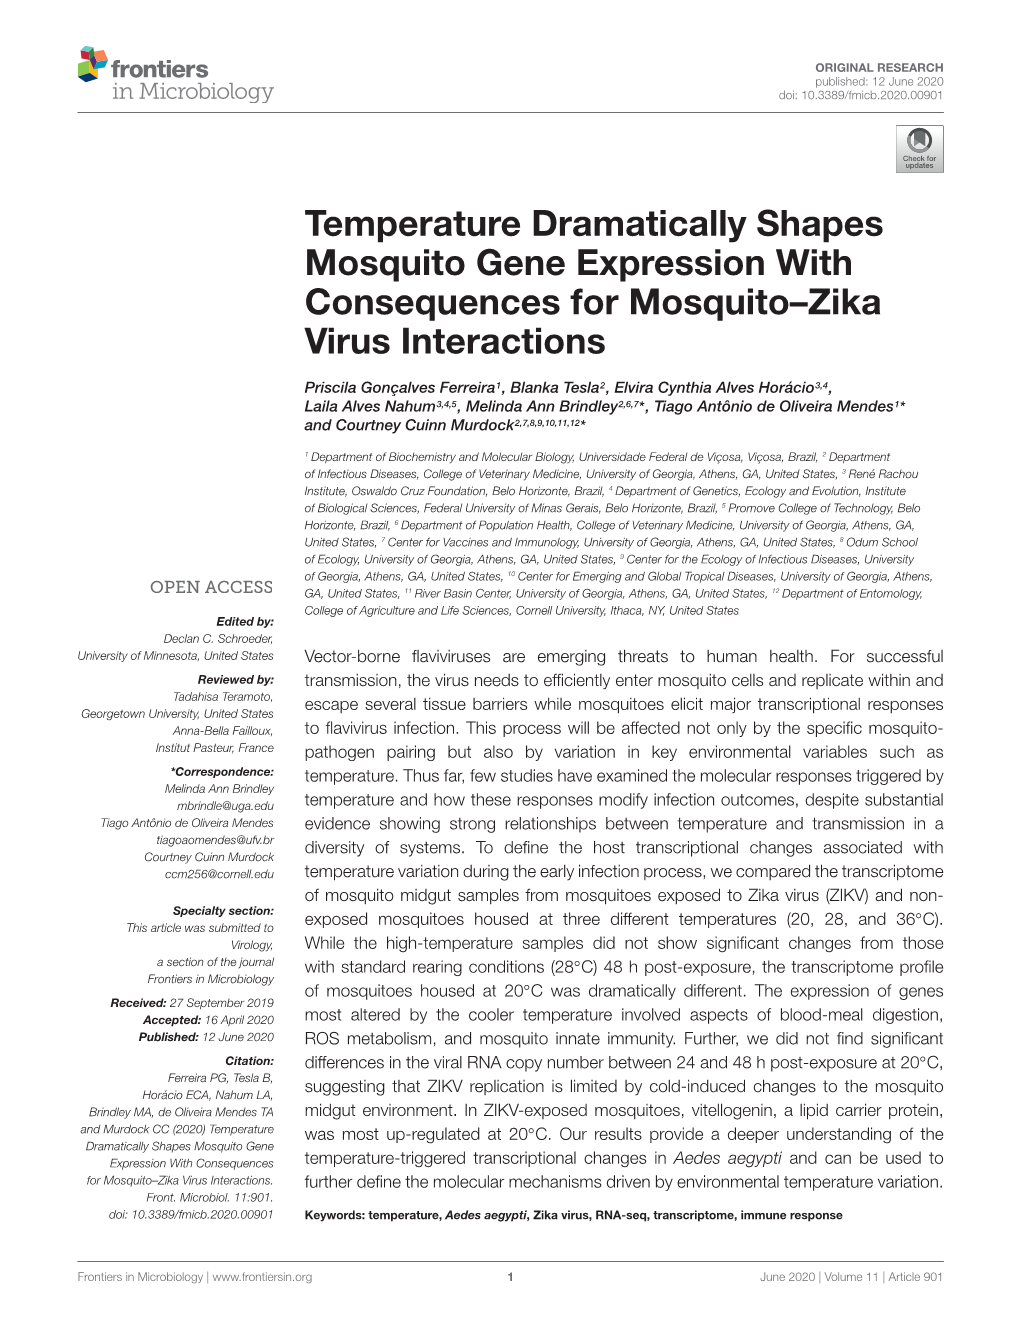 Temperature Dramatically Shapes Mosquito Gene Expression with Consequences for Mosquito–Zika Virus Interactions